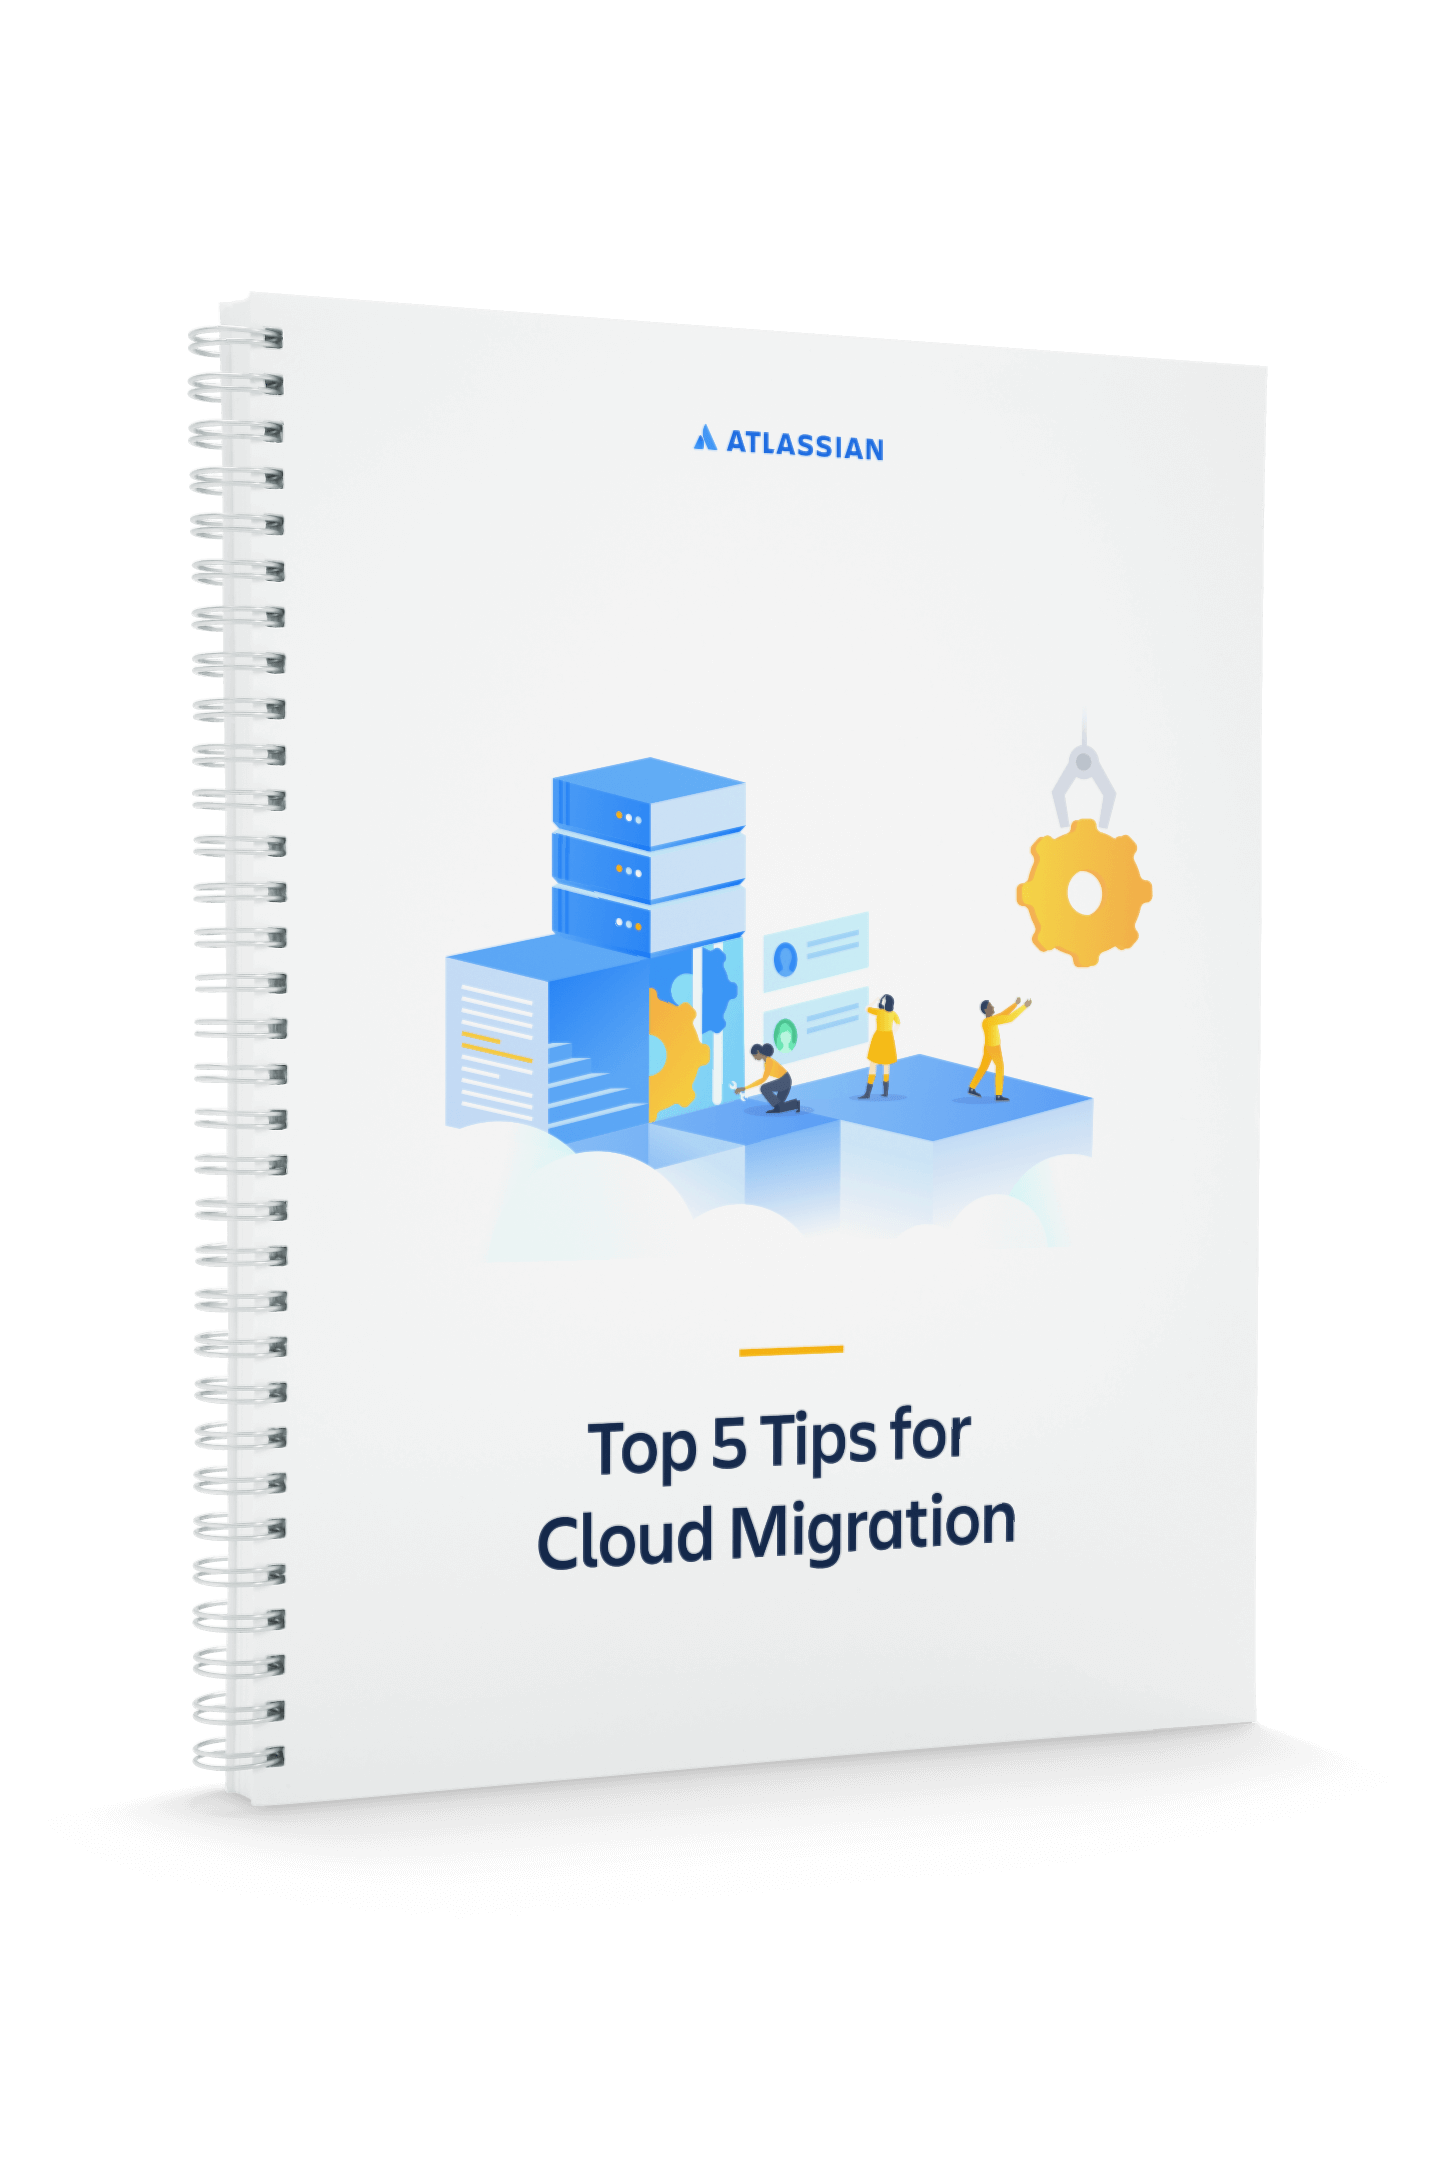 Top 5 tips for cloud migration